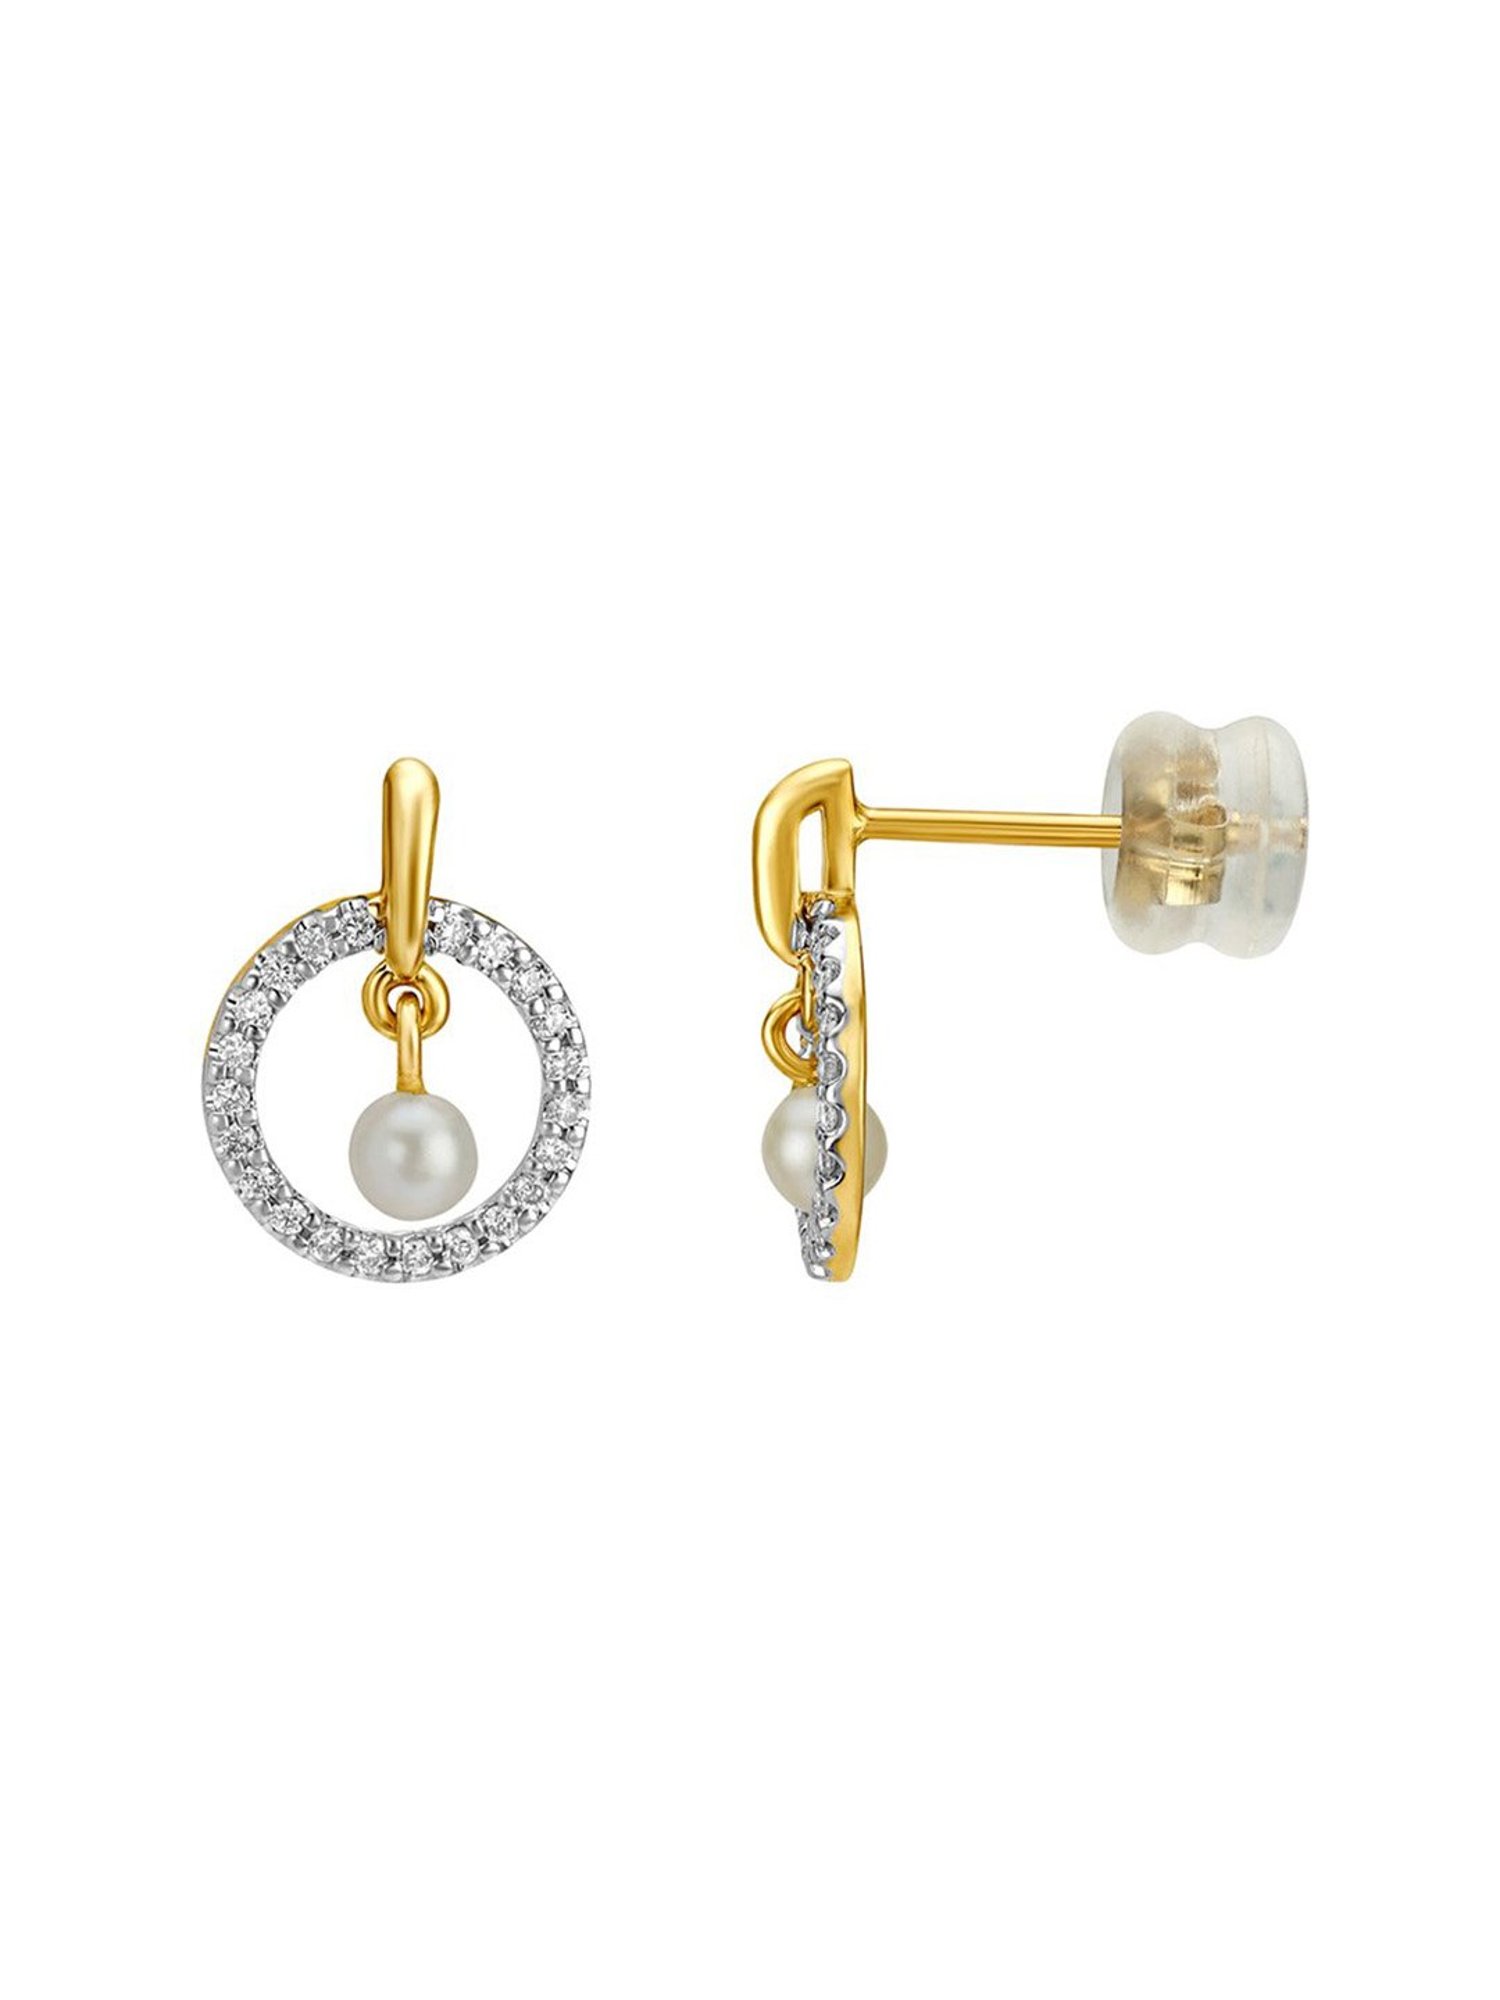 Tanishq 22KT Gold Earrings Design With Price Jewelry Bangalore 133547600  Gold  earrings with price Gold earrings models Gold earrings designs